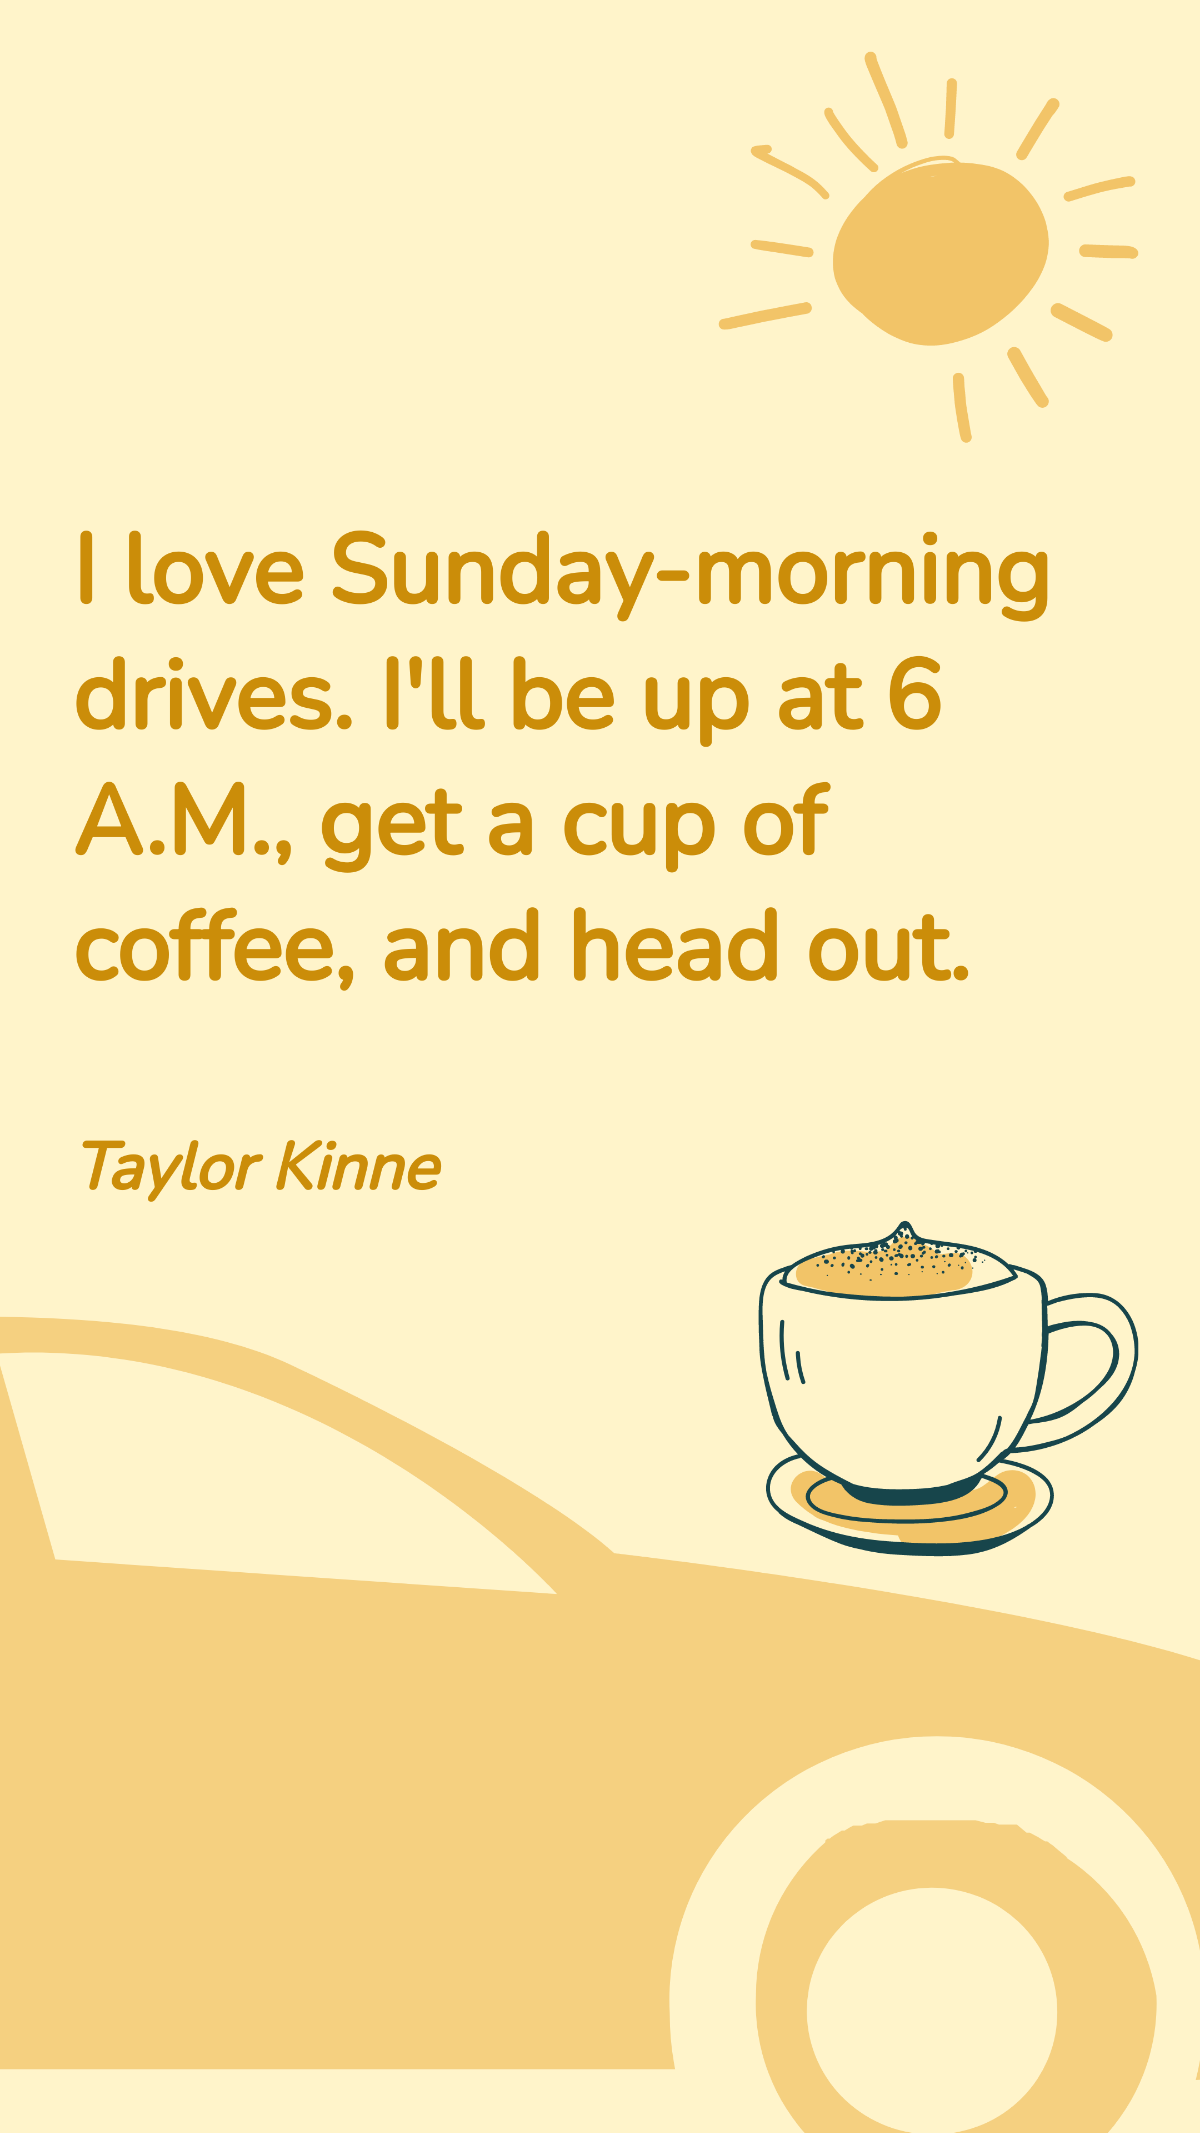 Taylor Kinne - I love Sunday-morning drives. I'll be up at 6 A.M., get a cup of coffee, and head out.